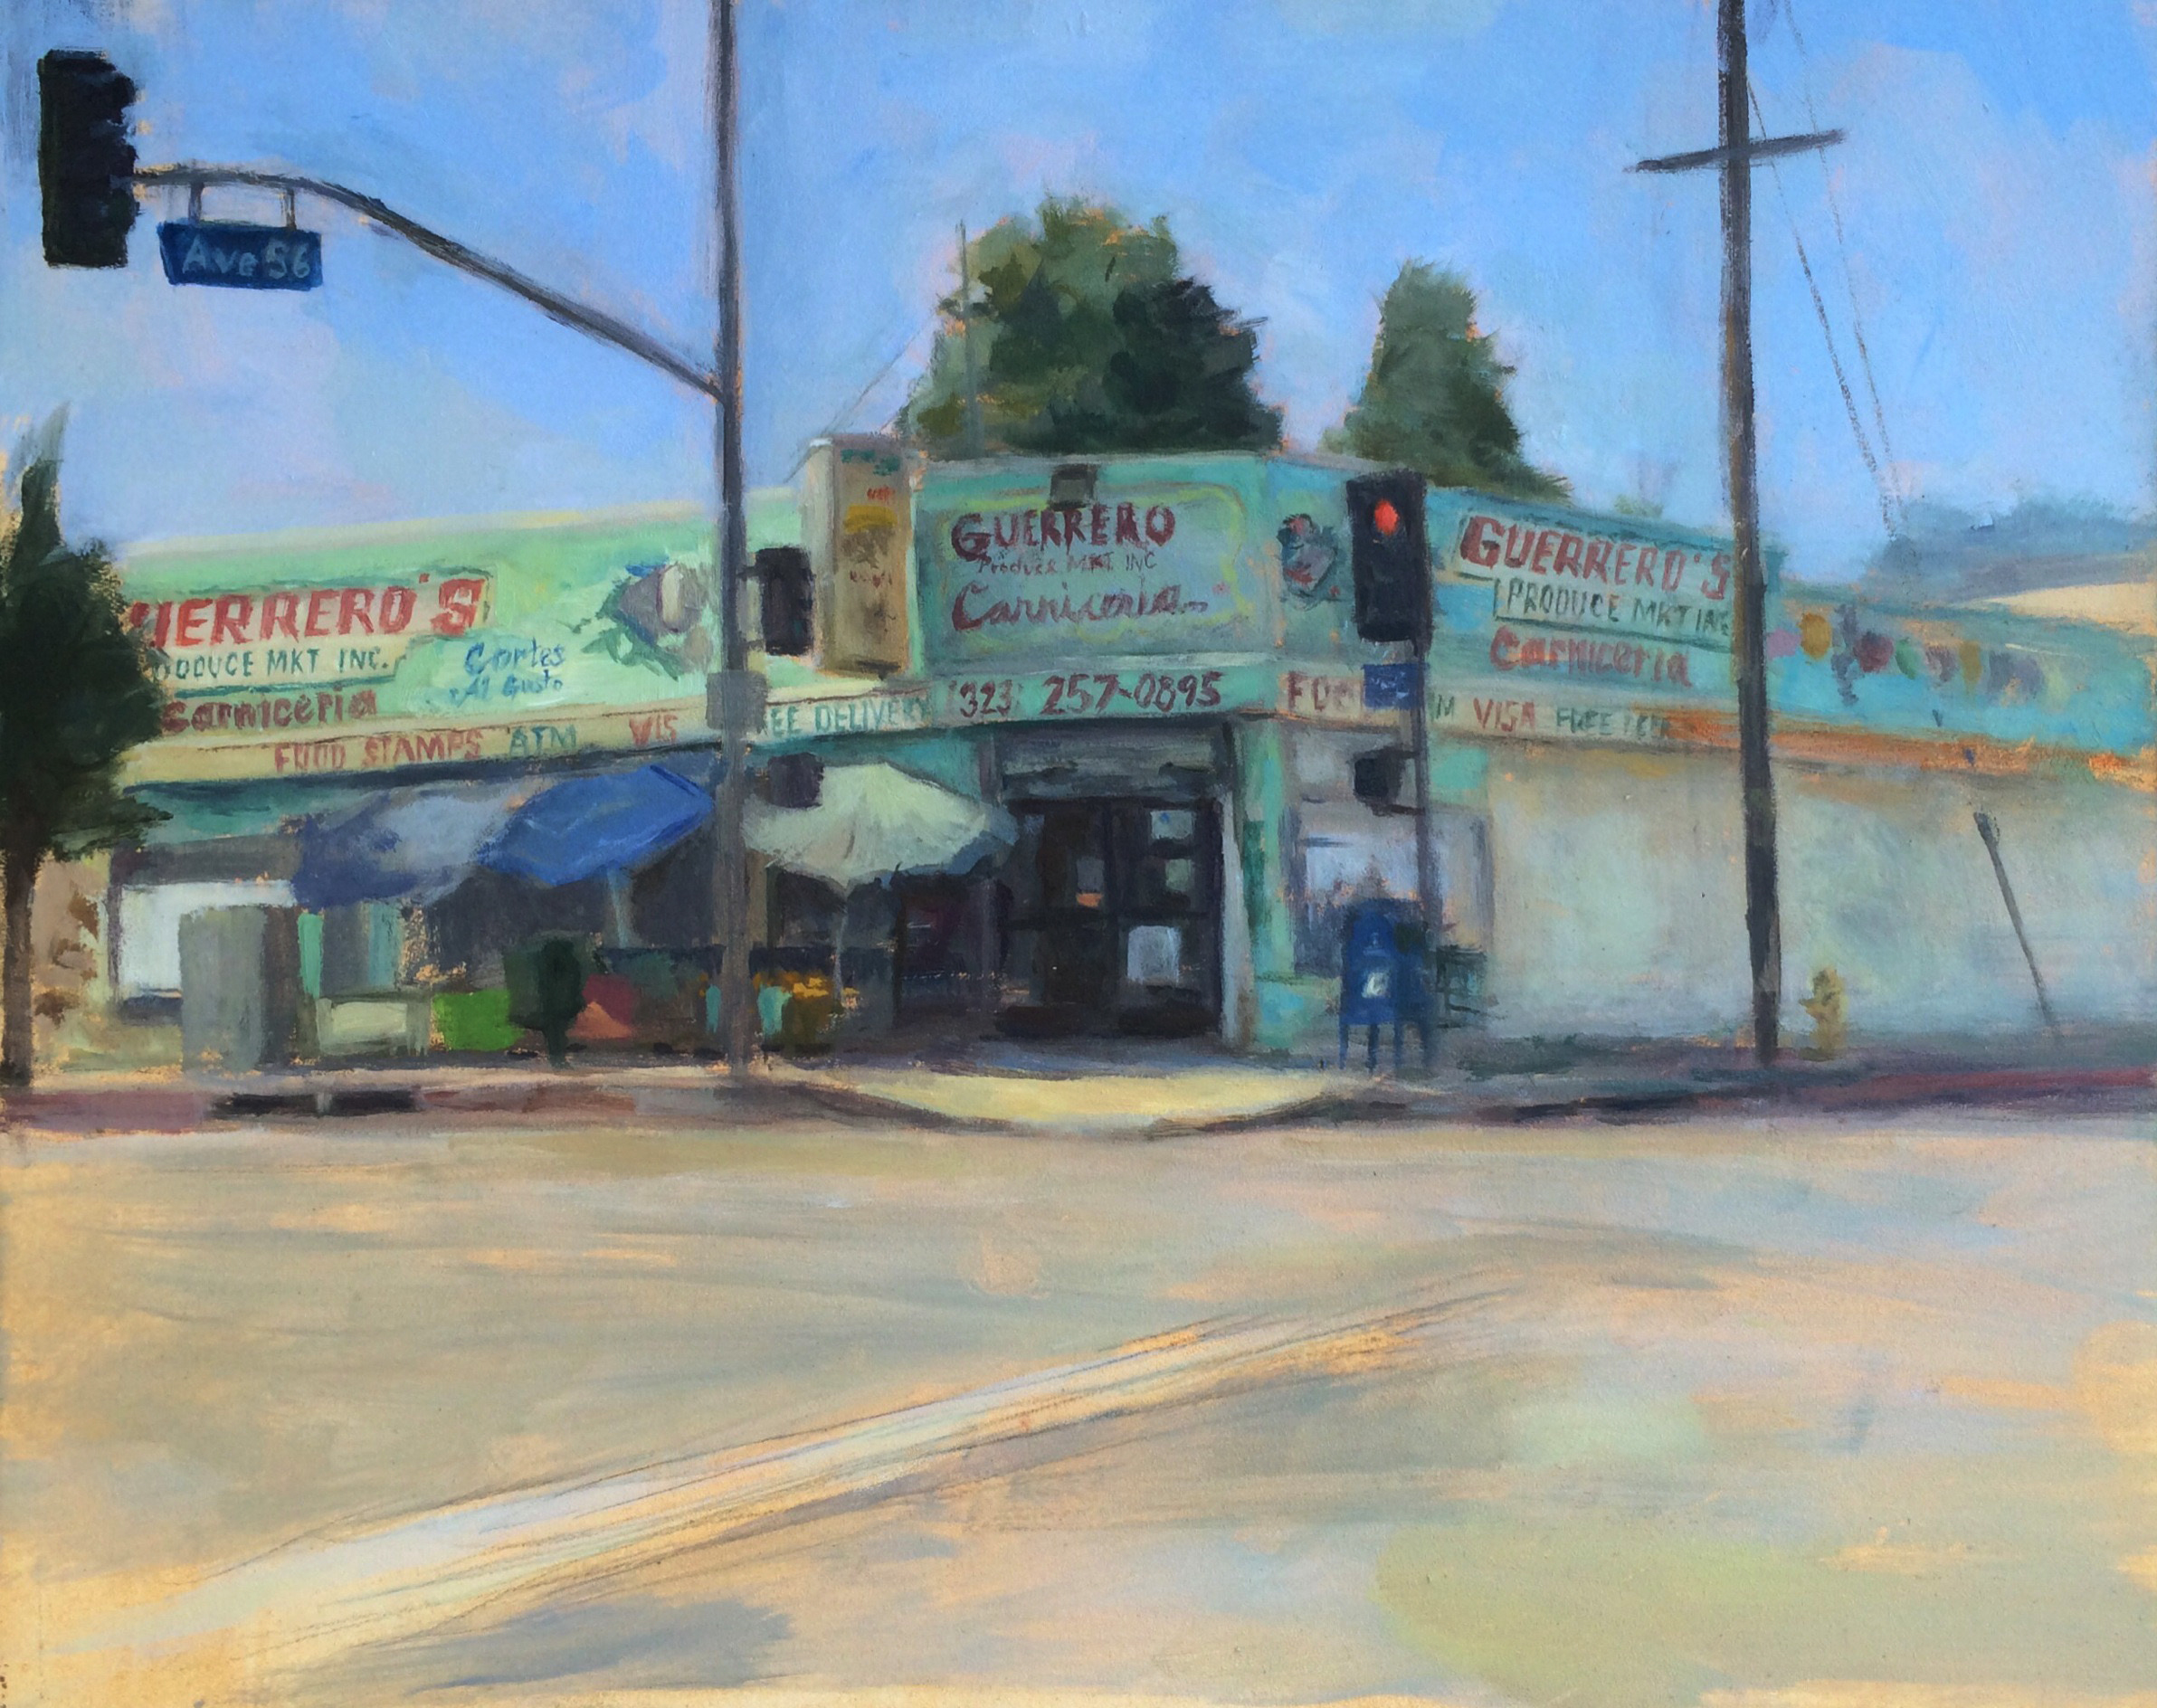   Guerrero Carniceria in Highland Park , oil on panel. 8x10 inches 